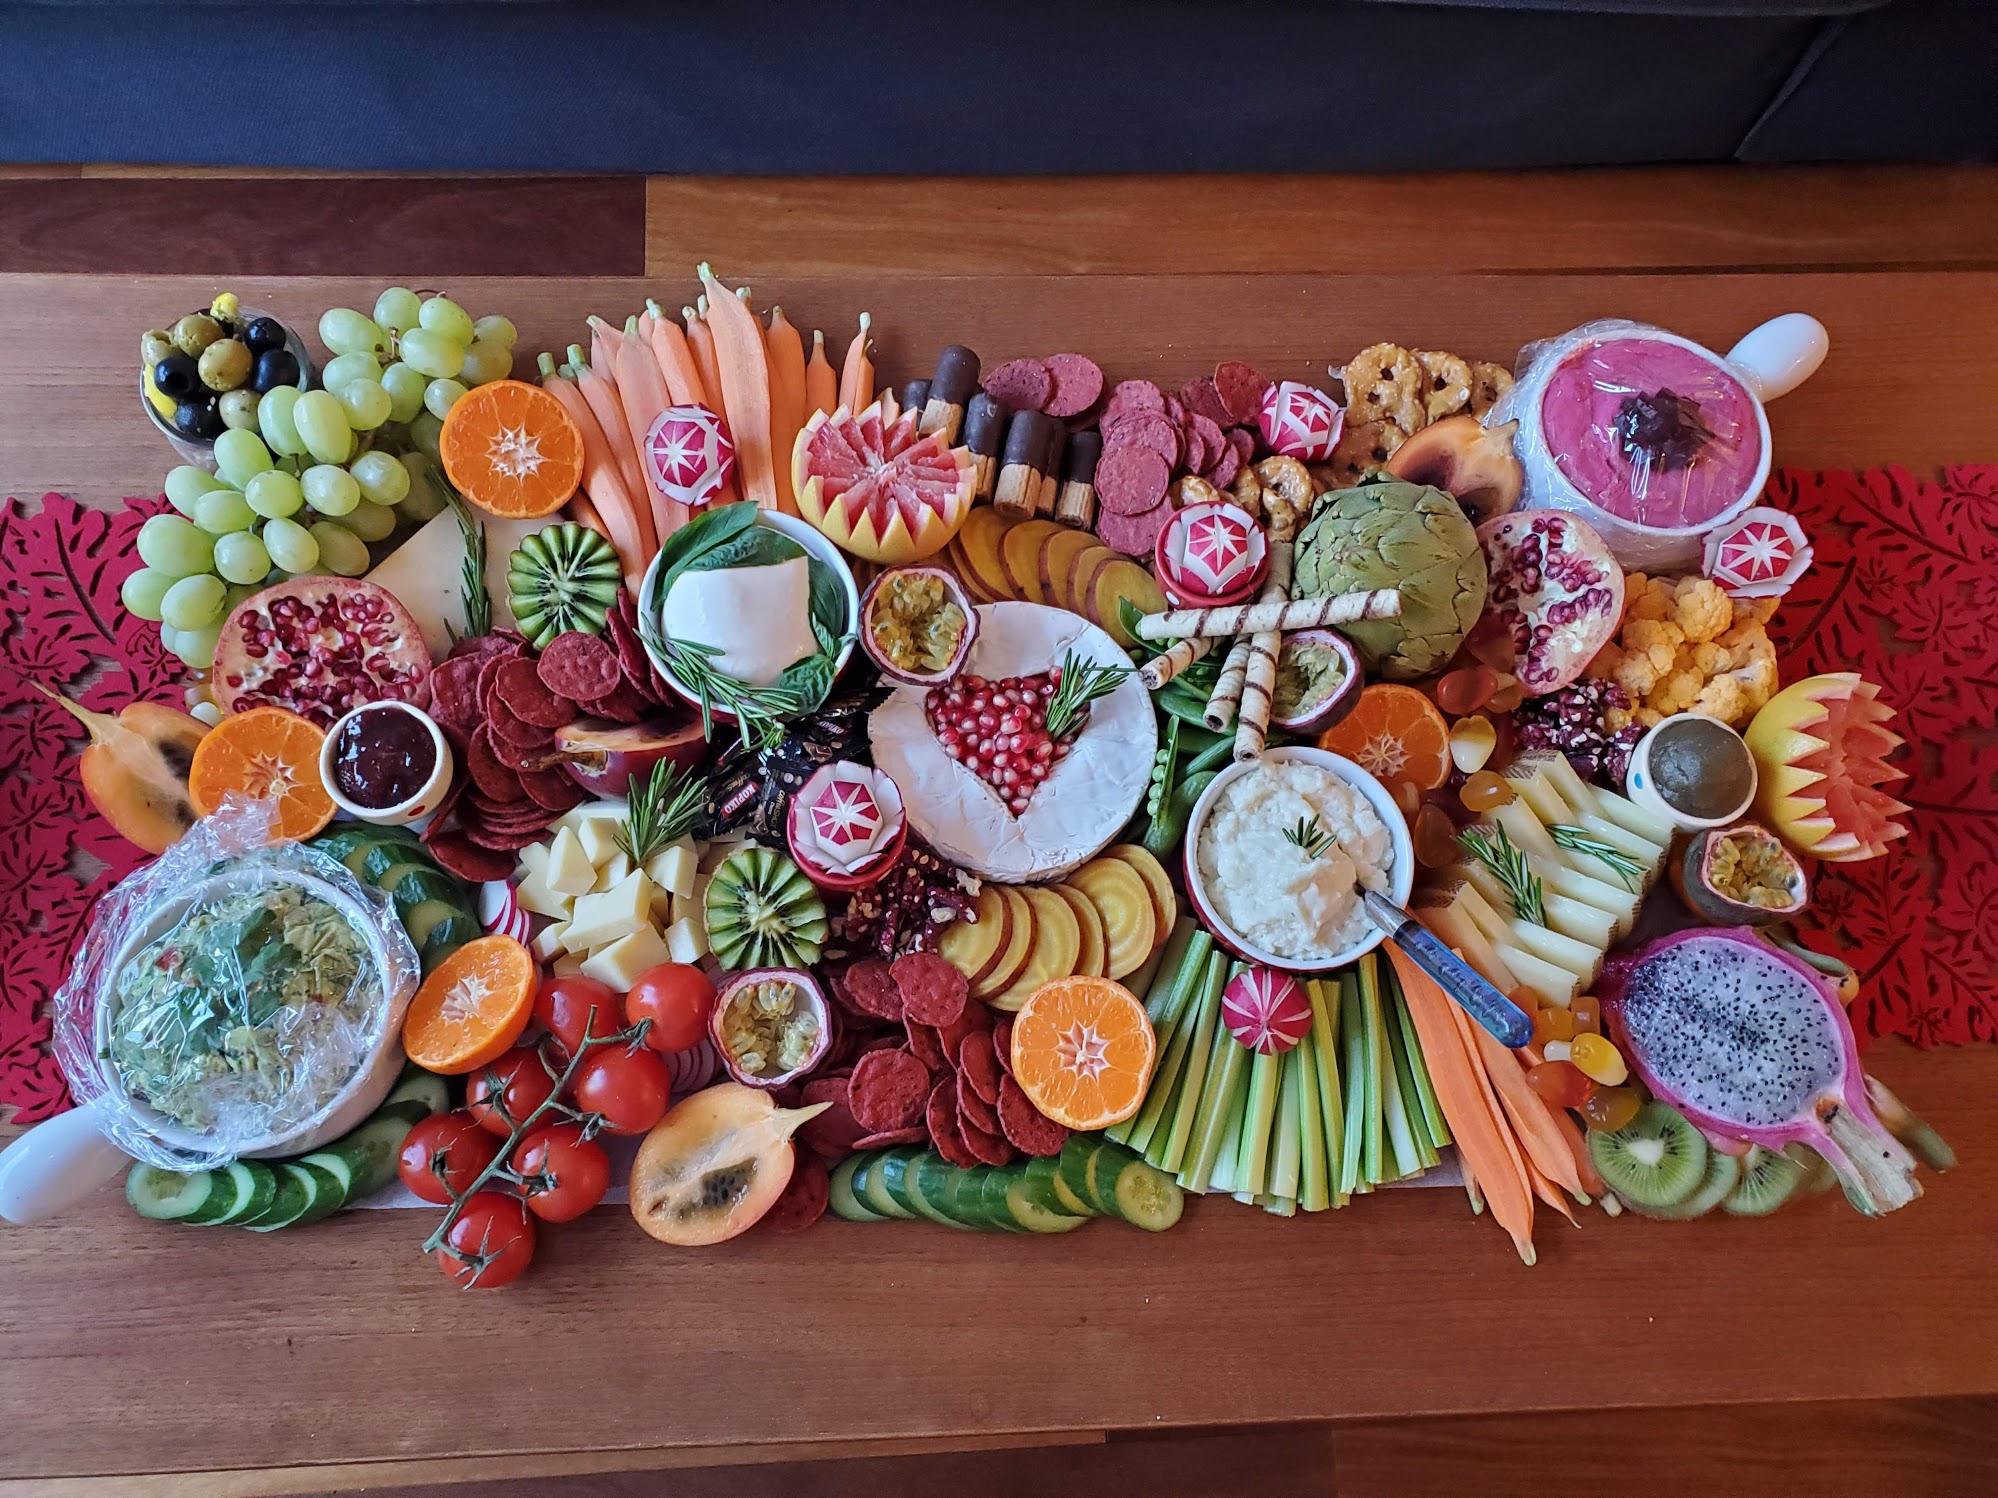 My much imporved grazing board